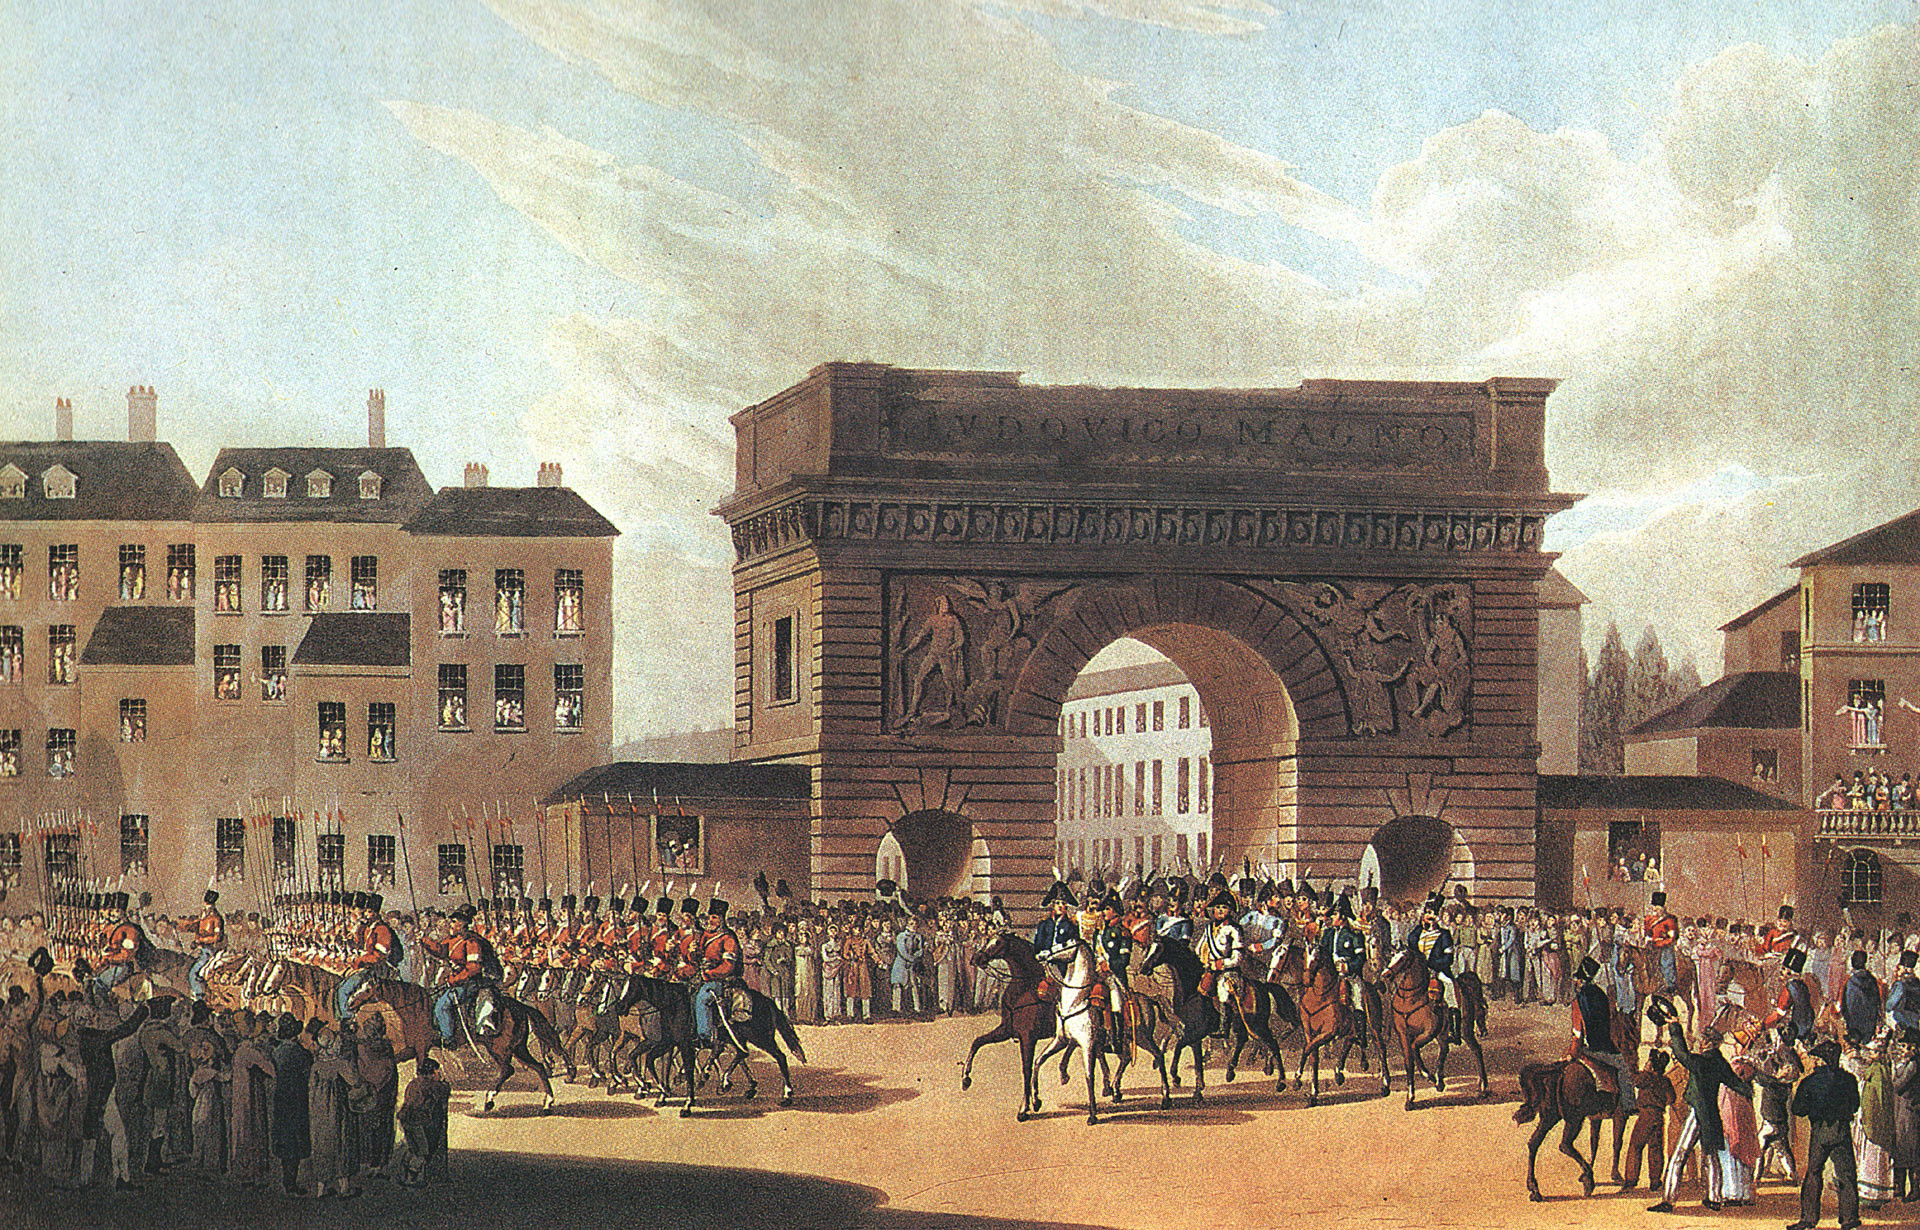  Unknown author. Russian army enters Paris in 1814.